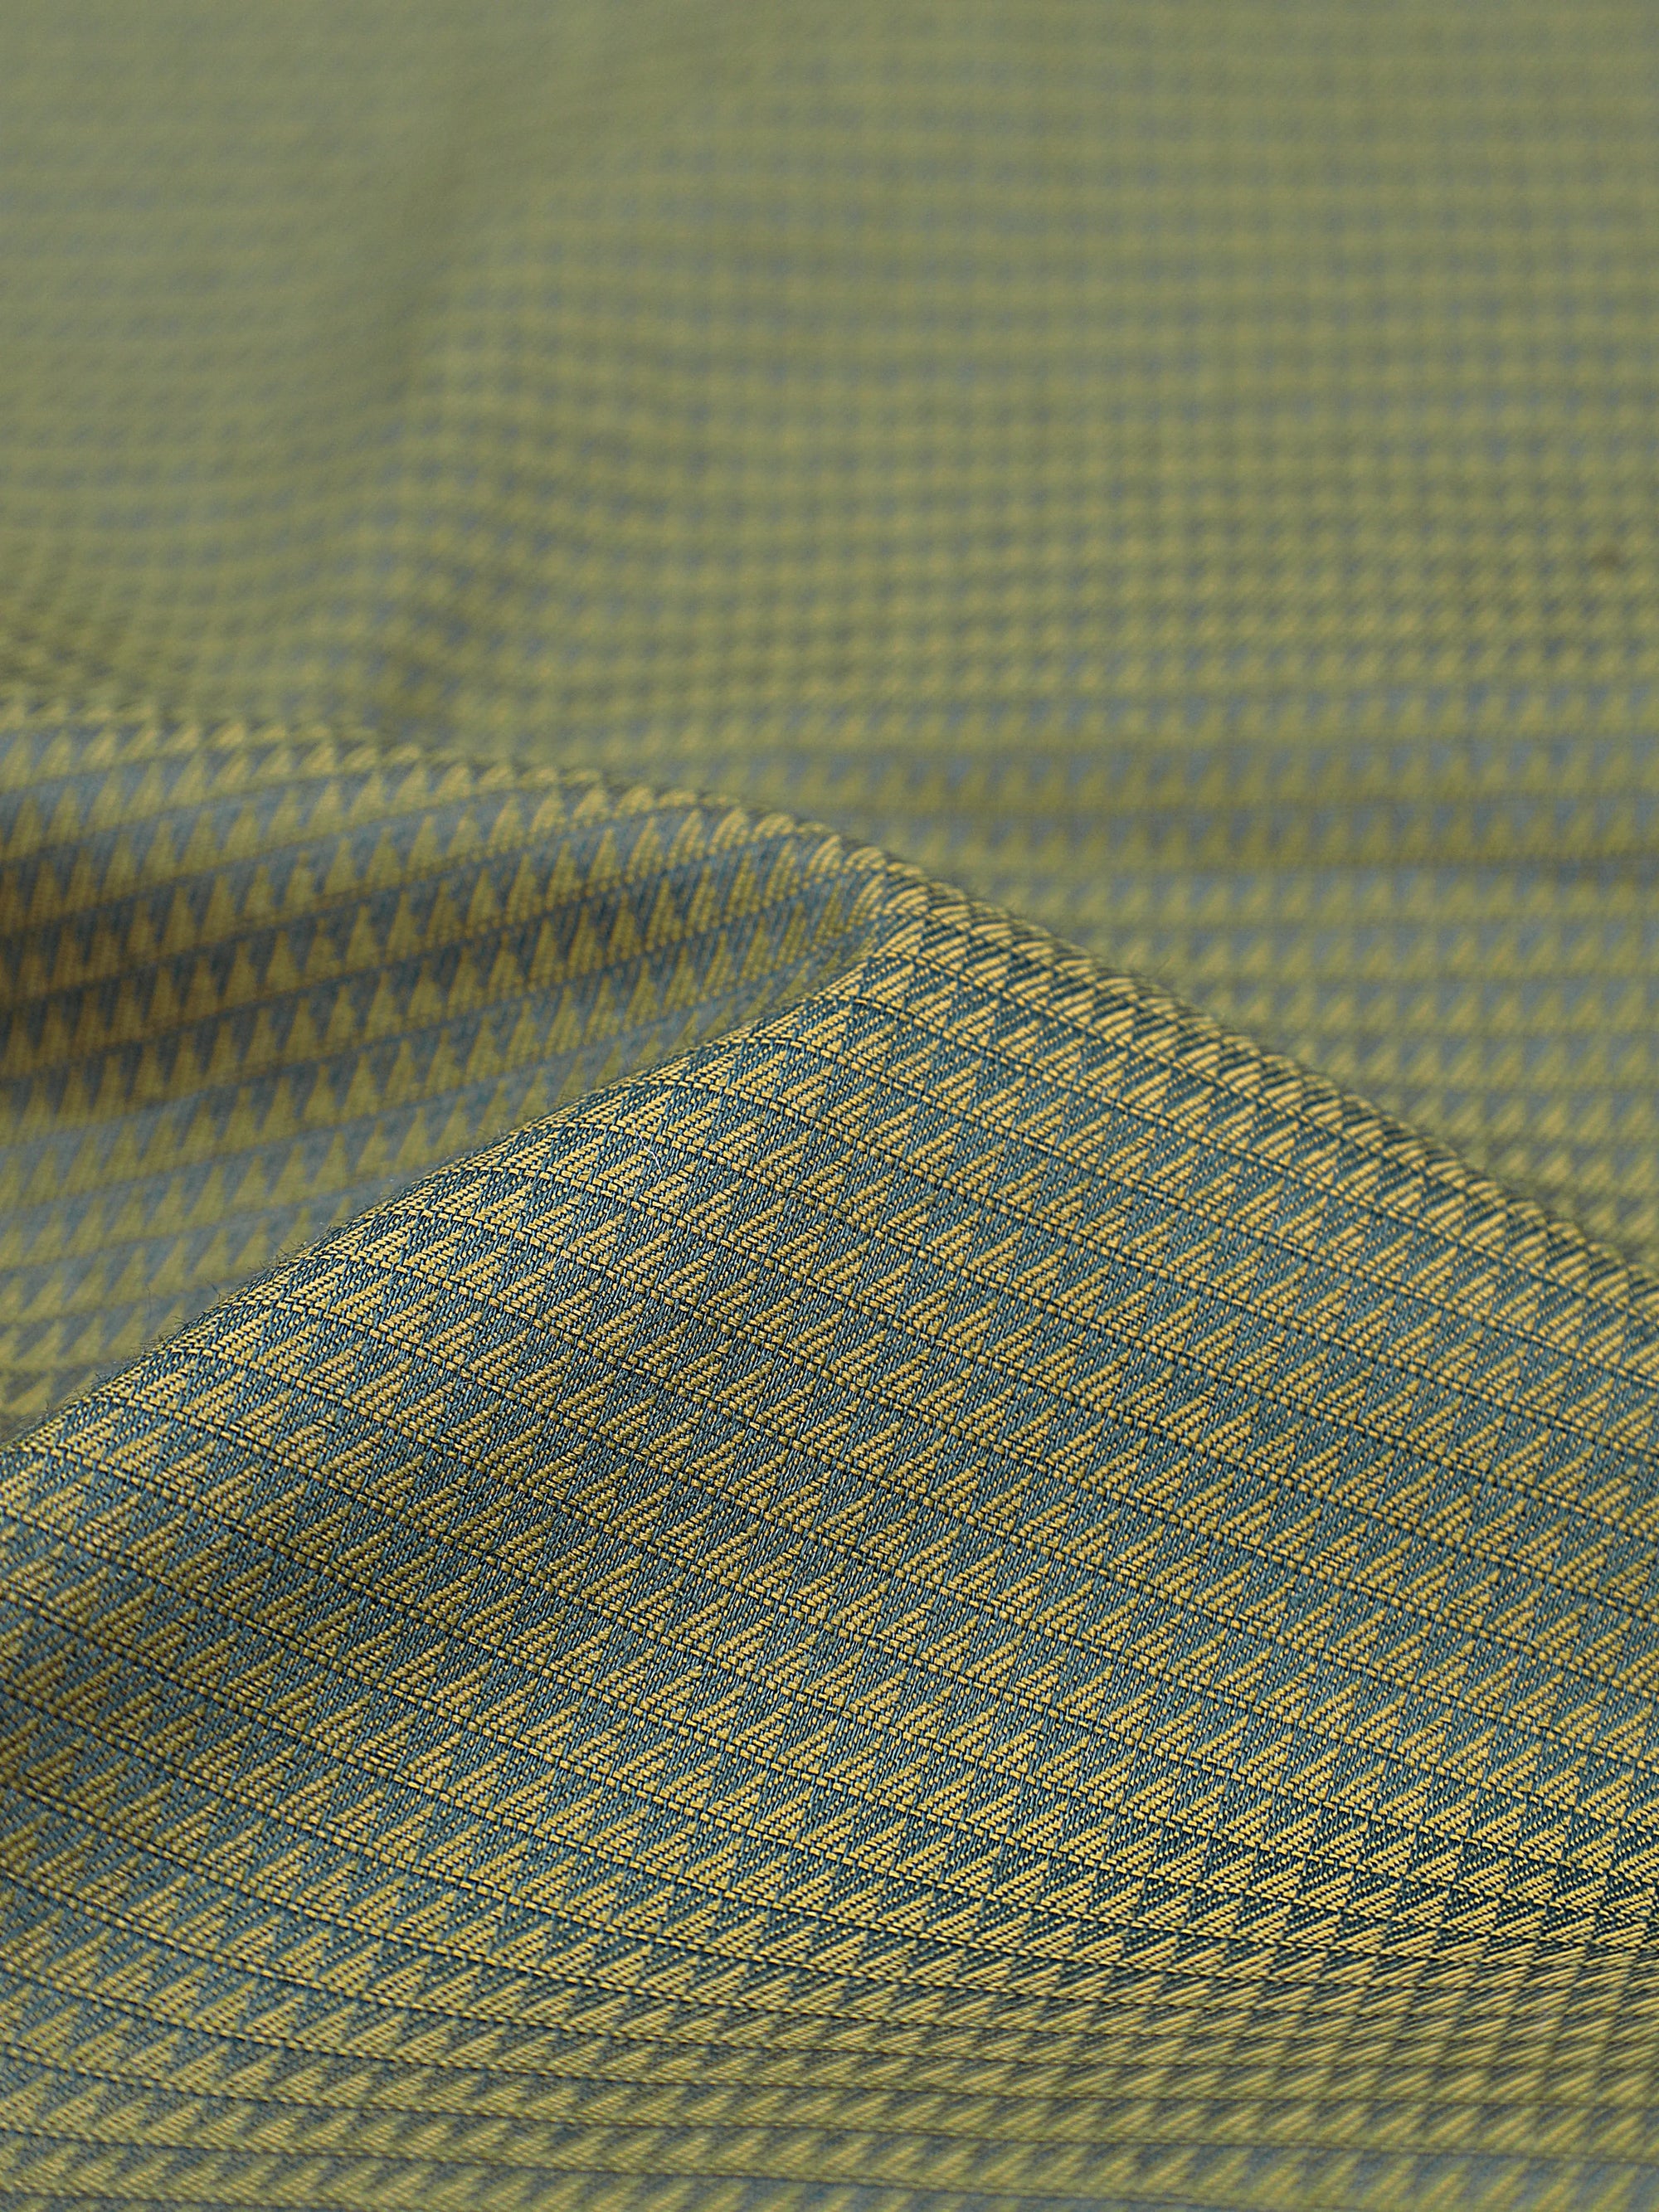 Olive Green Dobby Textured Jacquard Cotton Shirt-[ON SALE]